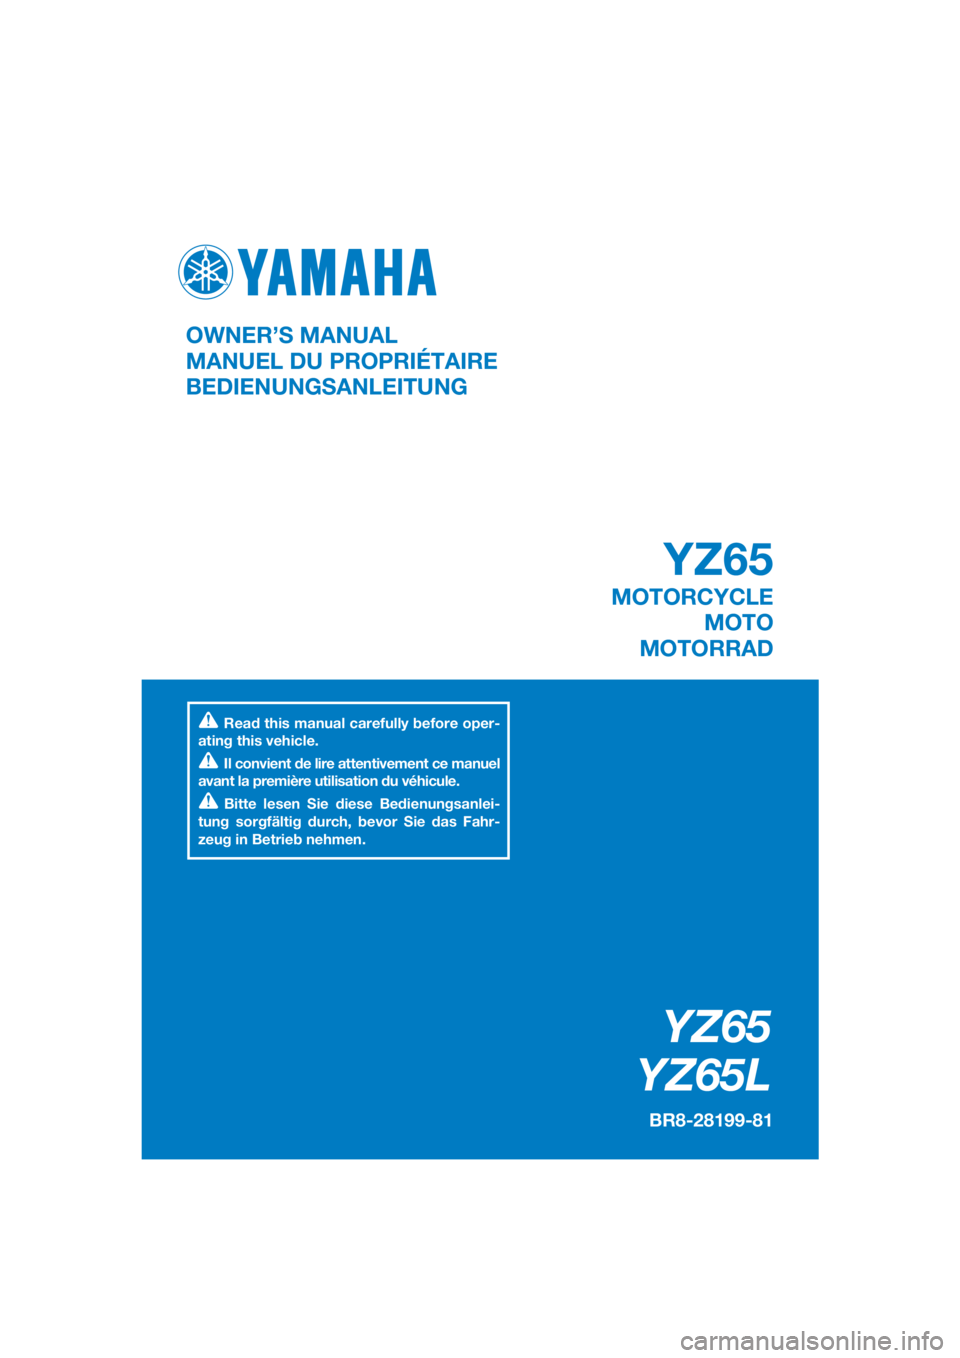 YAMAHA YZ65 2020  Betriebsanleitungen (in German) DIC183
YZ65
YZ65L
BR8-28199-81
OWNER’S MANUAL
MANUEL DU PROPRIÉTAIRE
BEDIENUNGSANLEITUNG
Read this manual carefully before oper-
ating this vehicle.
Il convient de lire attentivement ce manuel 
ava